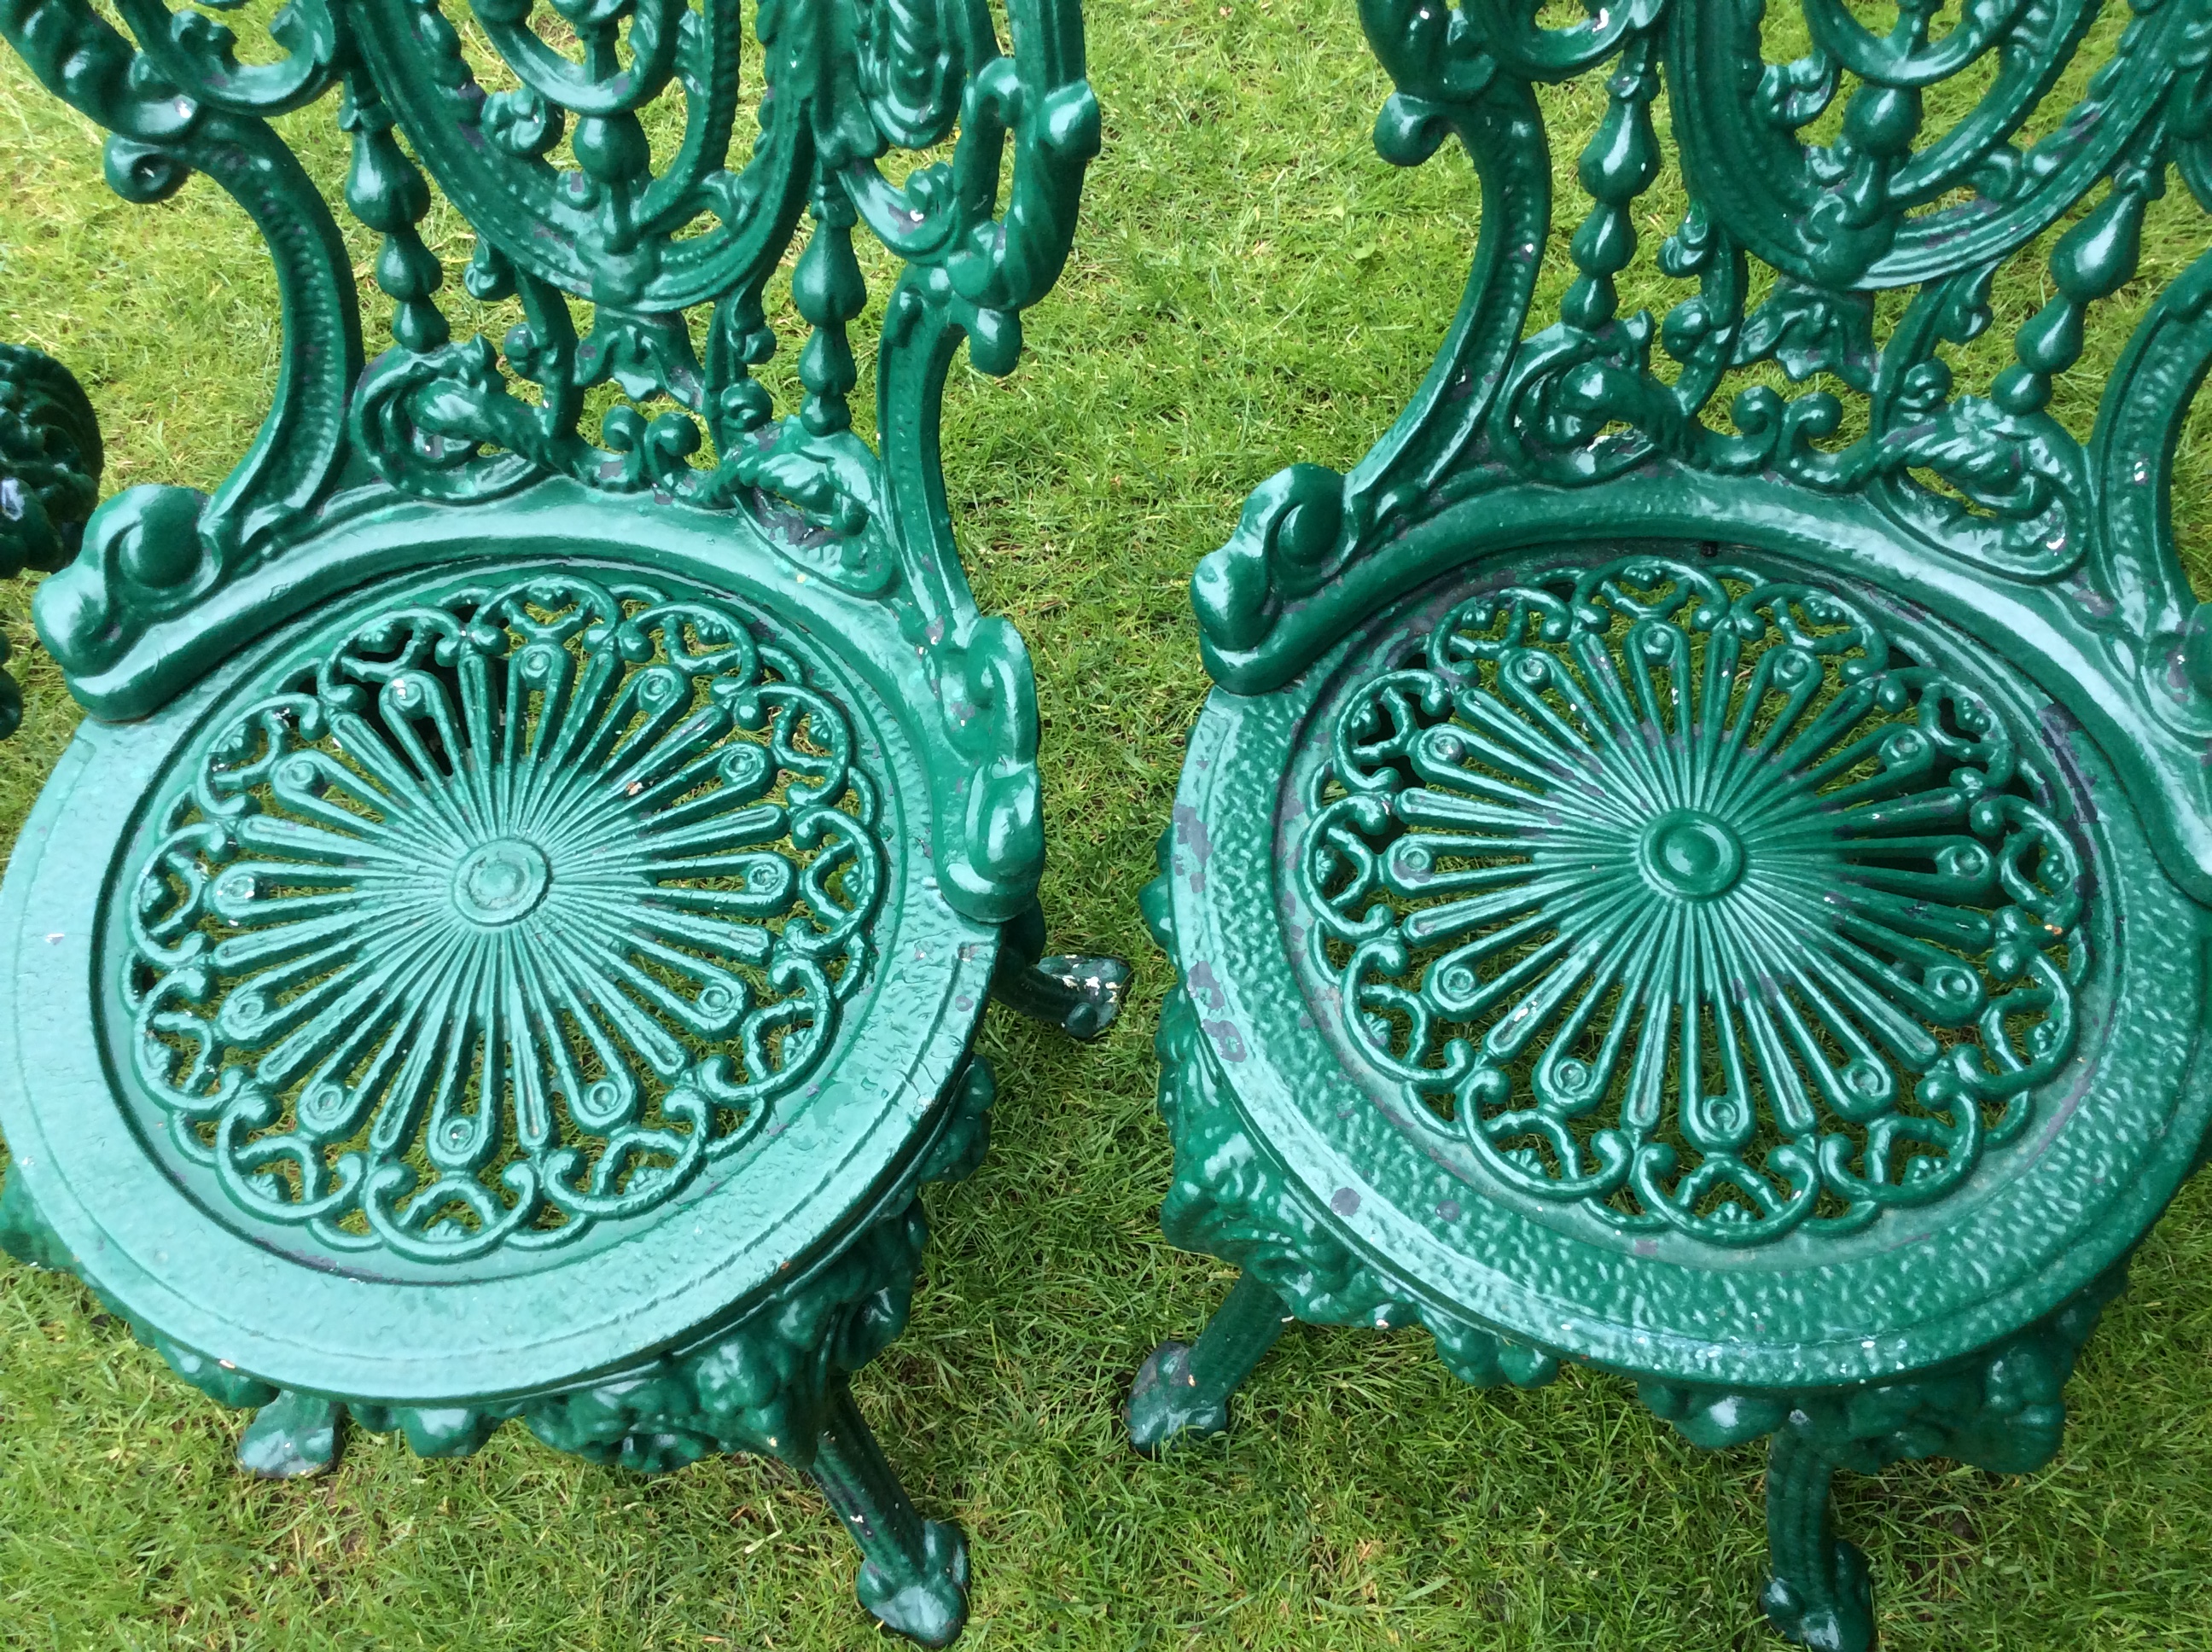 Rear Decorative Victorian Cast Iron Garden Chairs, Set Of 3 - Image 5 of 6